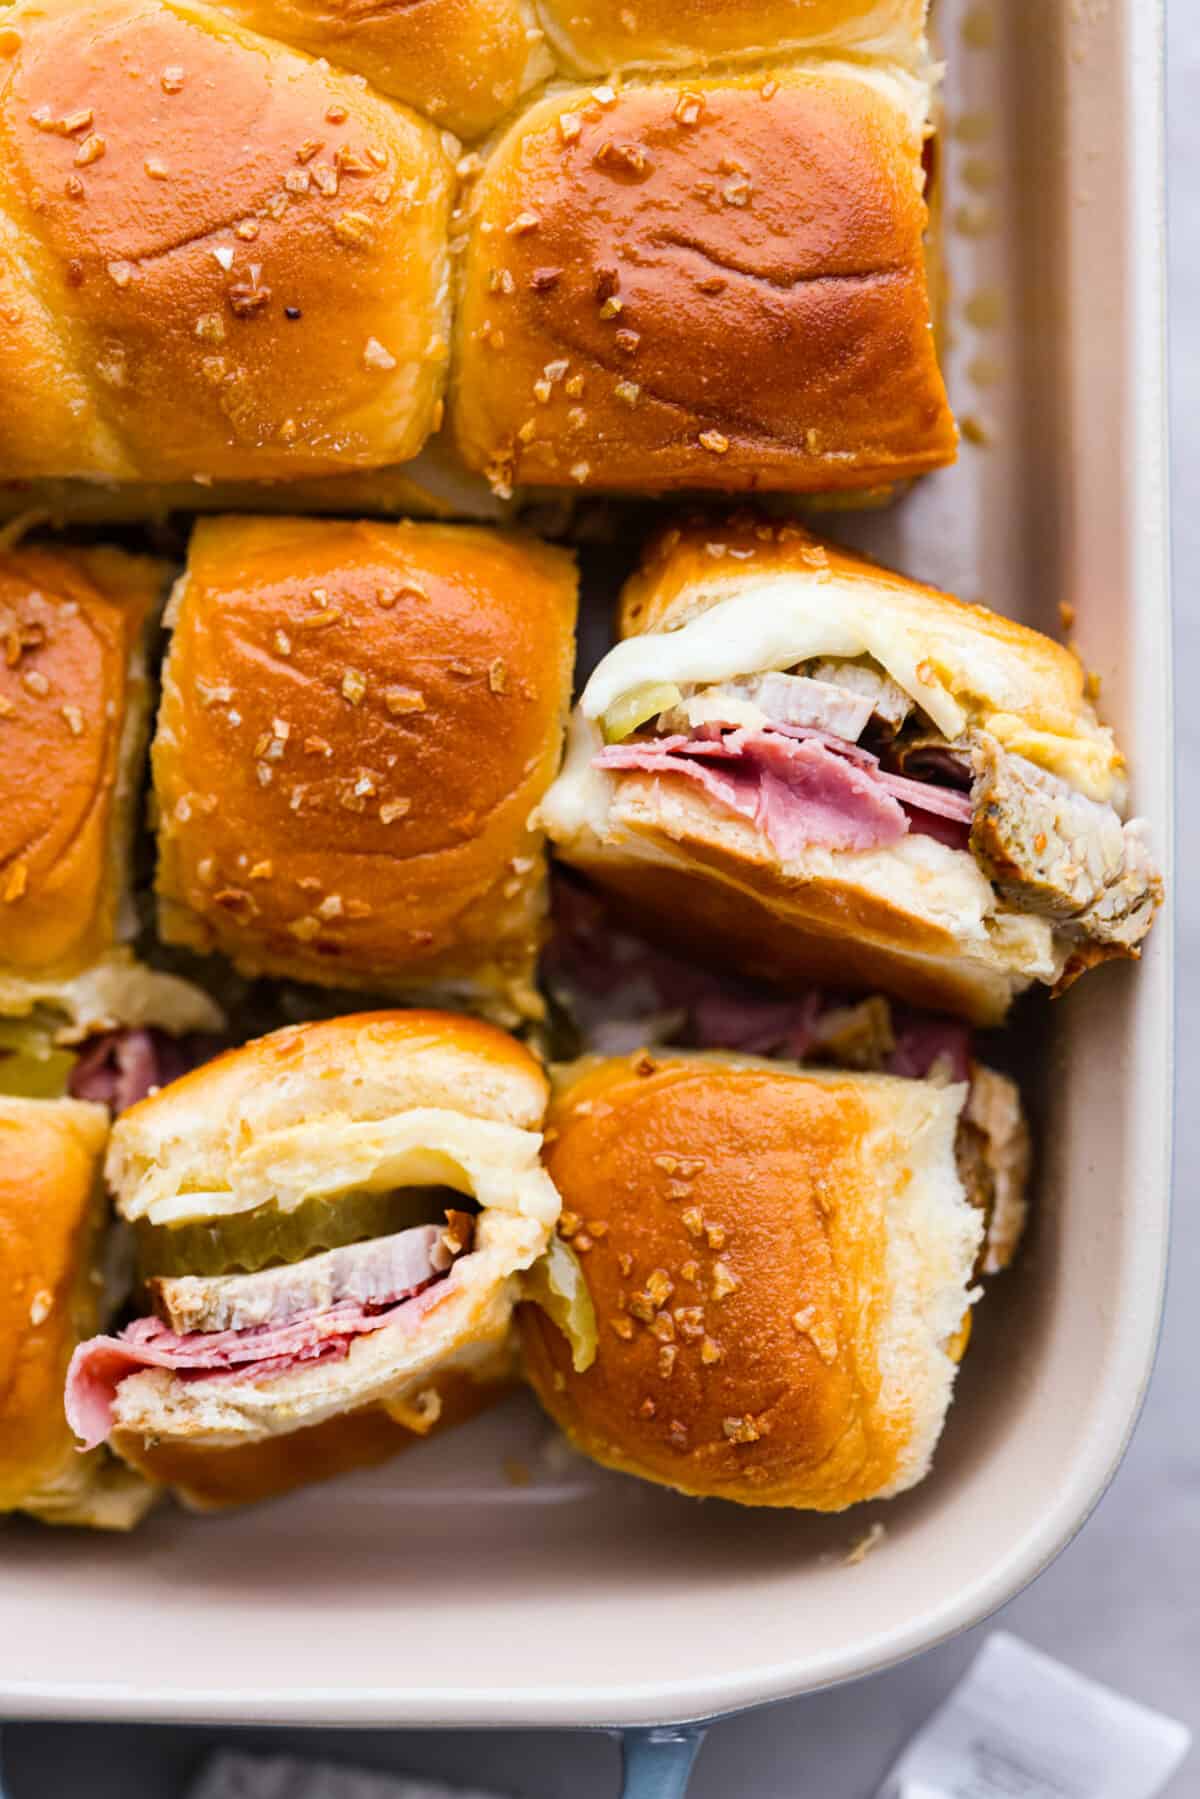 Top-down view of the Cuban sliders in a white baking dish. Two are turned on their side so you can see the filling.